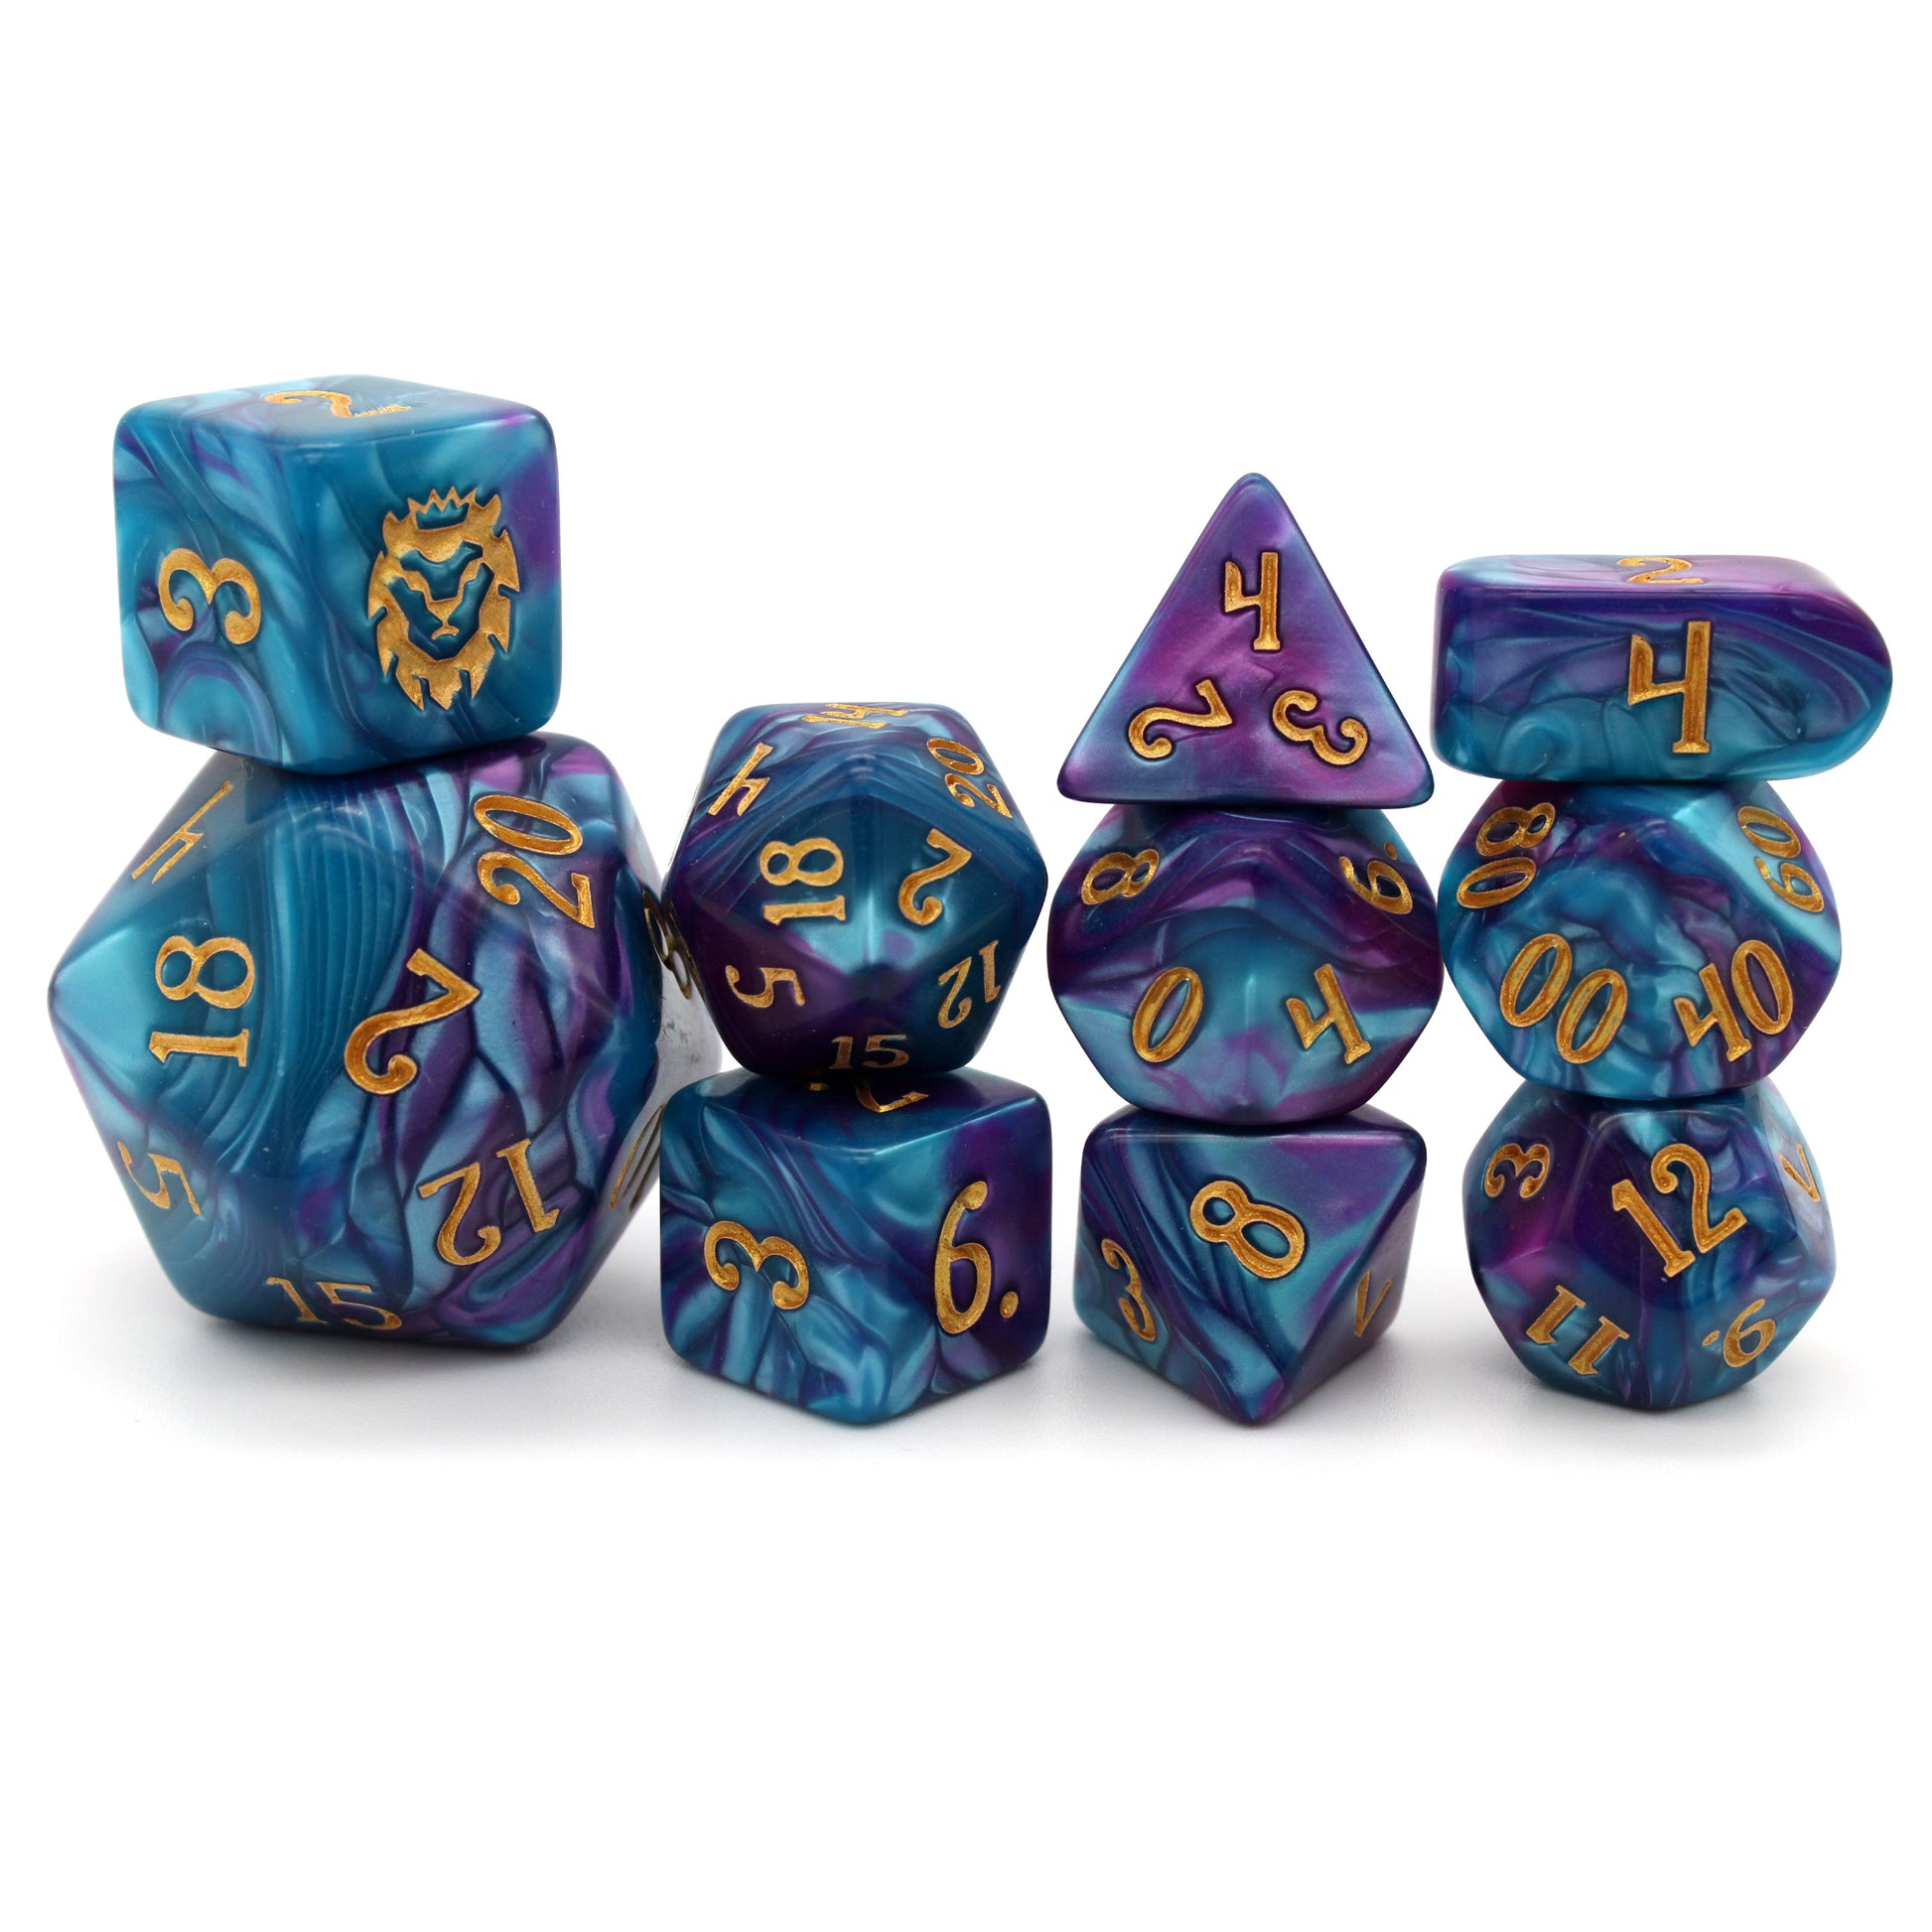 Shadow Storm is an otherworldly 10-piece acrylic set featuring tumultuous swirls of blue and purple, inked in gold.